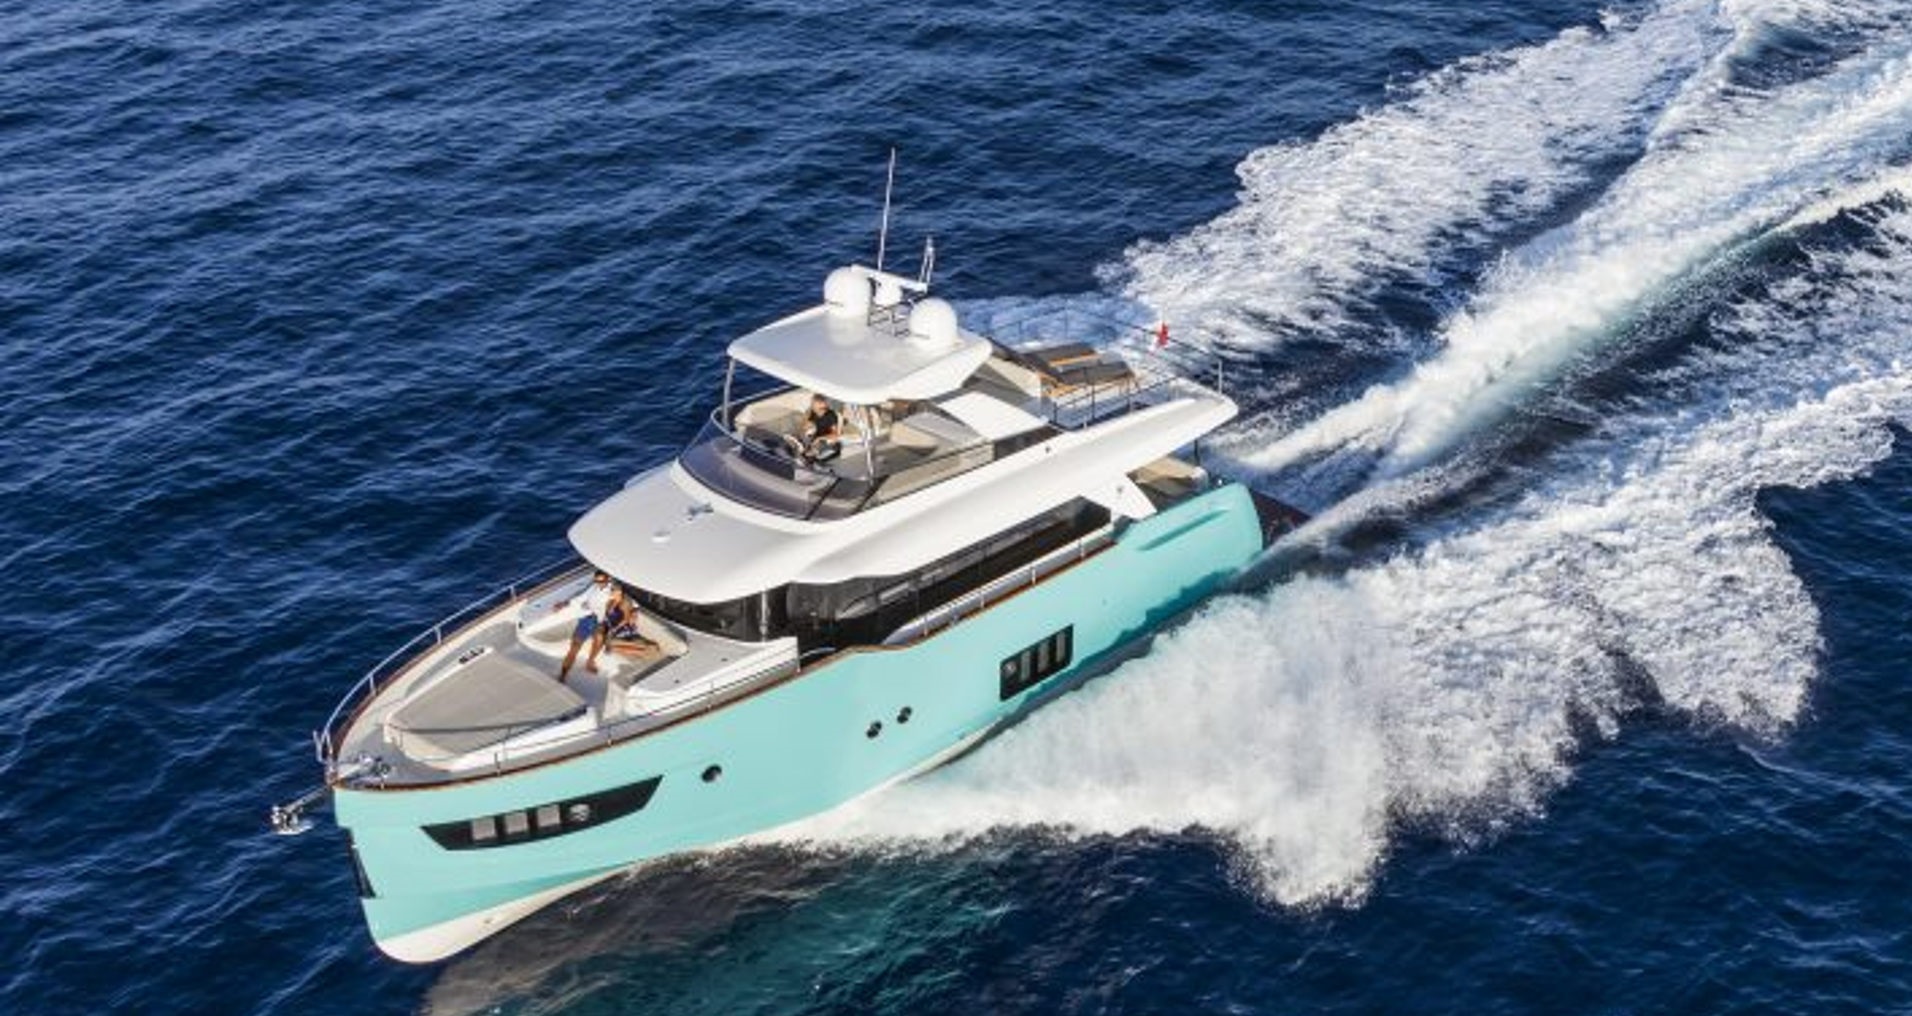 Meet the exquisite Absolute Navetta 58 yacht for sale